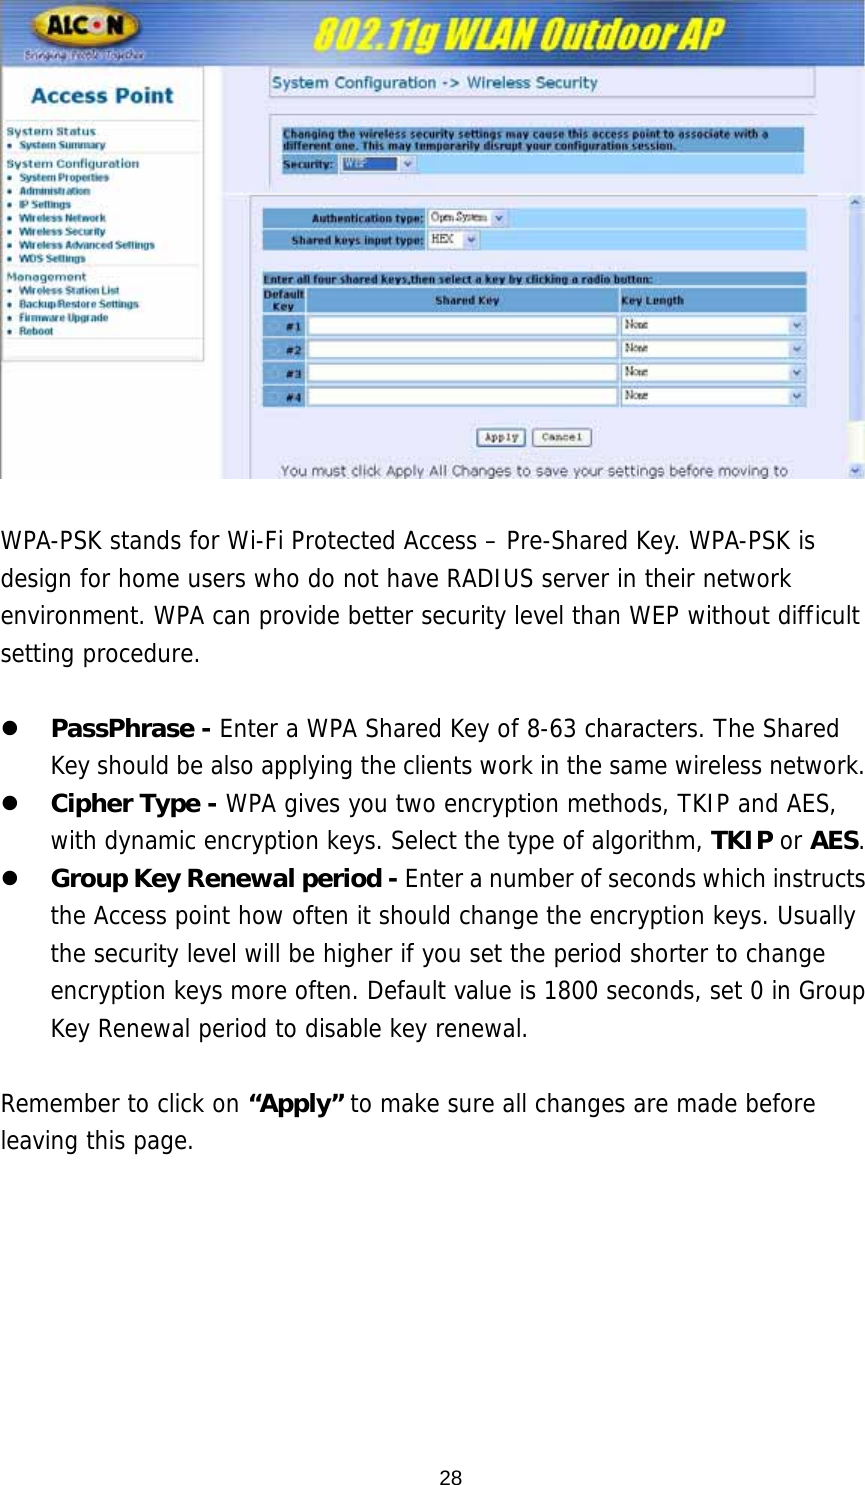   WPA-PSK stands for Wi-Fi Protected Access – Pre-Shared Key. WPA-PSK is design for home users who do not have RADIUS server in their network environment. WPA can provide better security level than WEP without difficult setting procedure.  z PassPhrase - Enter a WPA Shared Key of 8-63 characters. The Shared Key should be also applying the clients work in the same wireless network. z Cipher Type - WPA gives you two encryption methods, TKIP and AES, with dynamic encryption keys. Select the type of algorithm, TKIP or AES.  z Group Key Renewal period - Enter a number of seconds which instructs the Access point how often it should change the encryption keys. Usually the security level will be higher if you set the period shorter to change encryption keys more often. Default value is 1800 seconds, set 0 in Group Key Renewal period to disable key renewal.   Remember to click on “Apply” to make sure all changes are made before leaving this page.   28